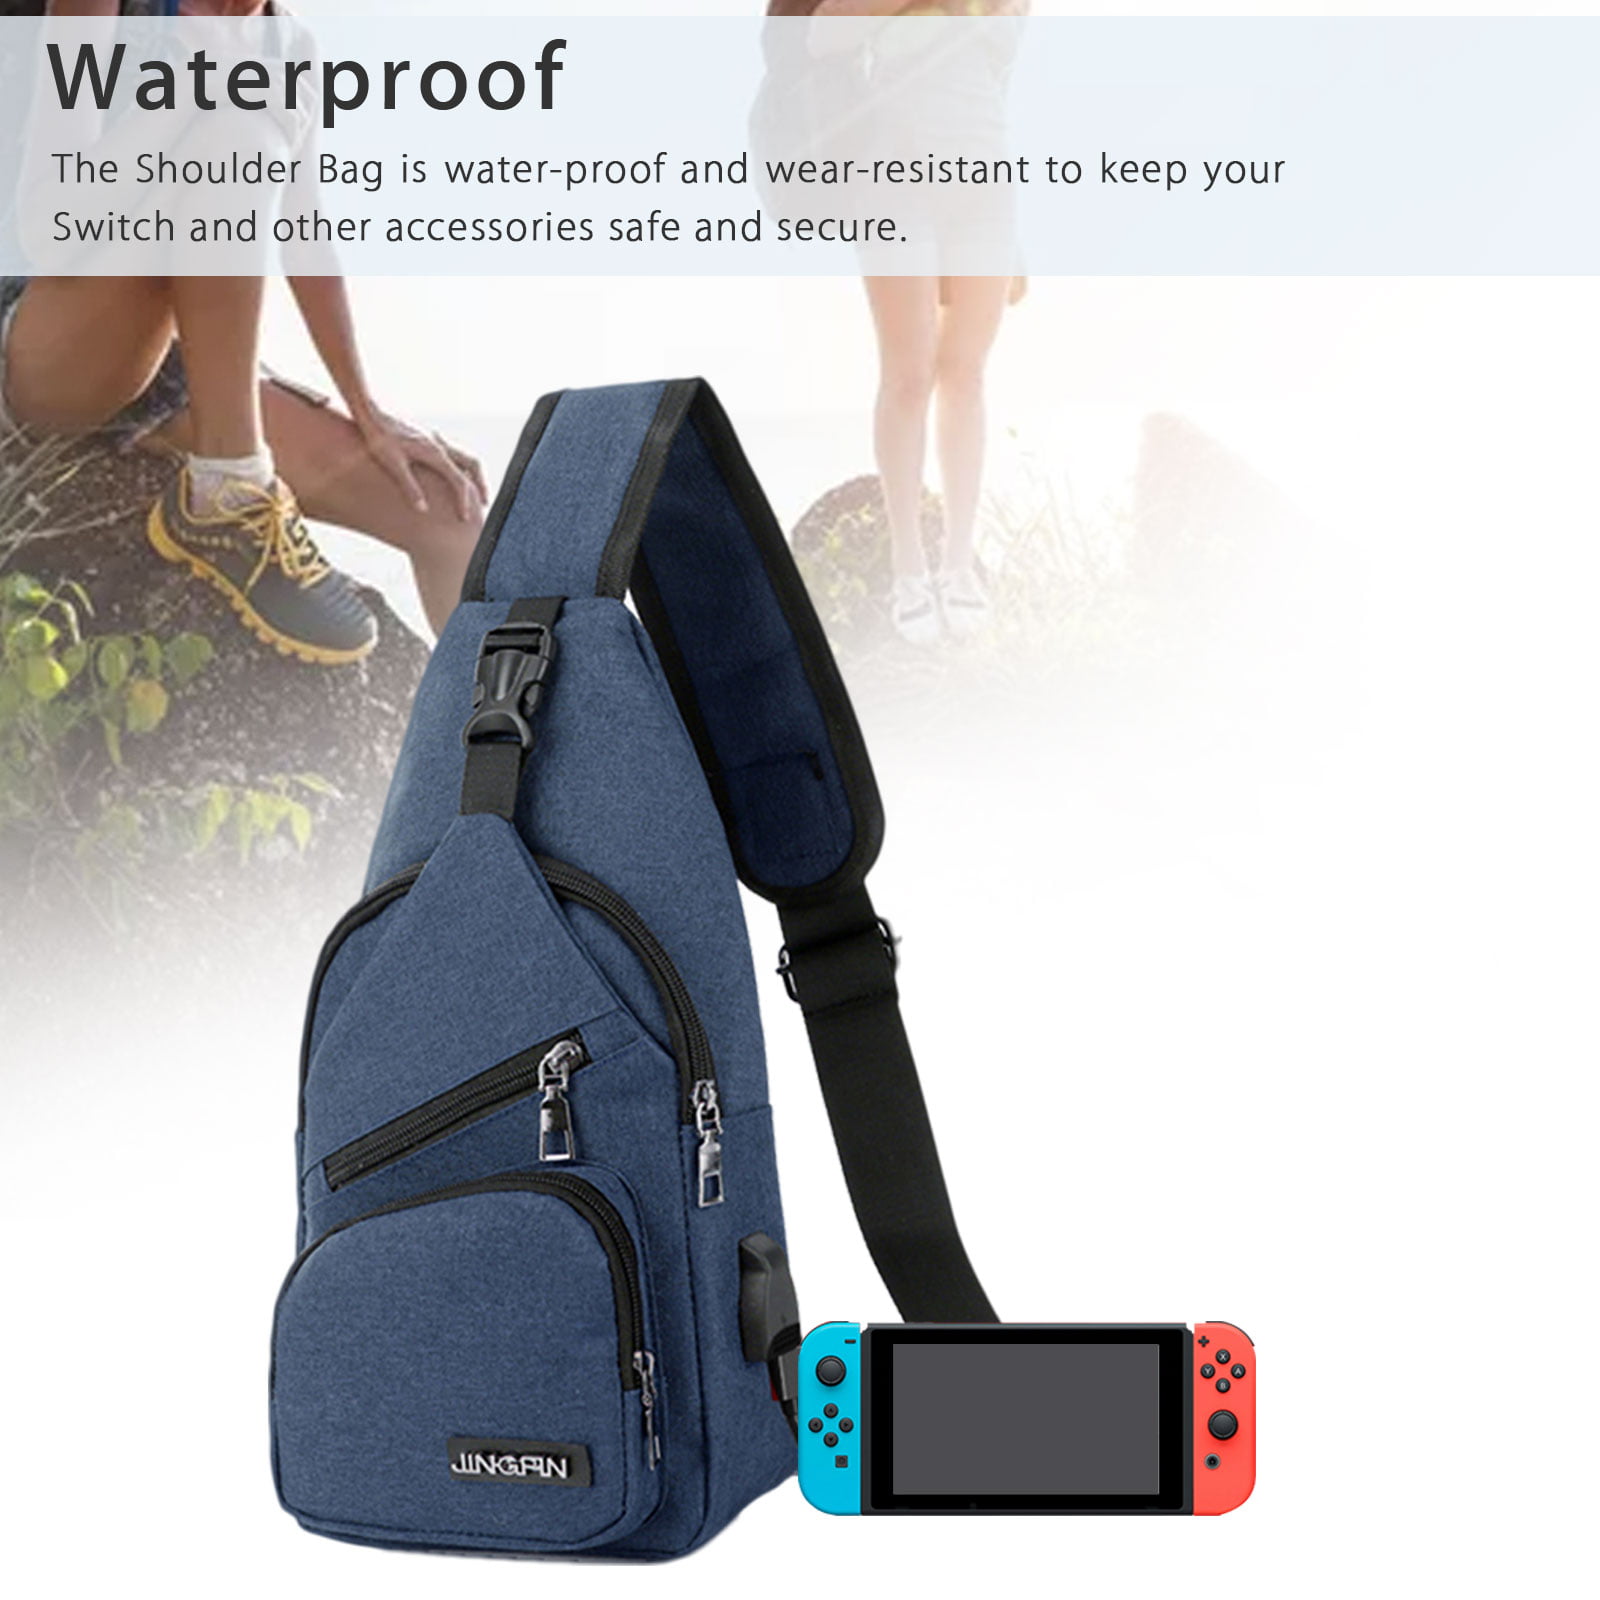 AmHoo Sling Backpack Chest Shoudler Crossbody Bag Waterproof Hiking Daypack for Women and Man with Water Bottle Holder and USB Charging Port-Black 